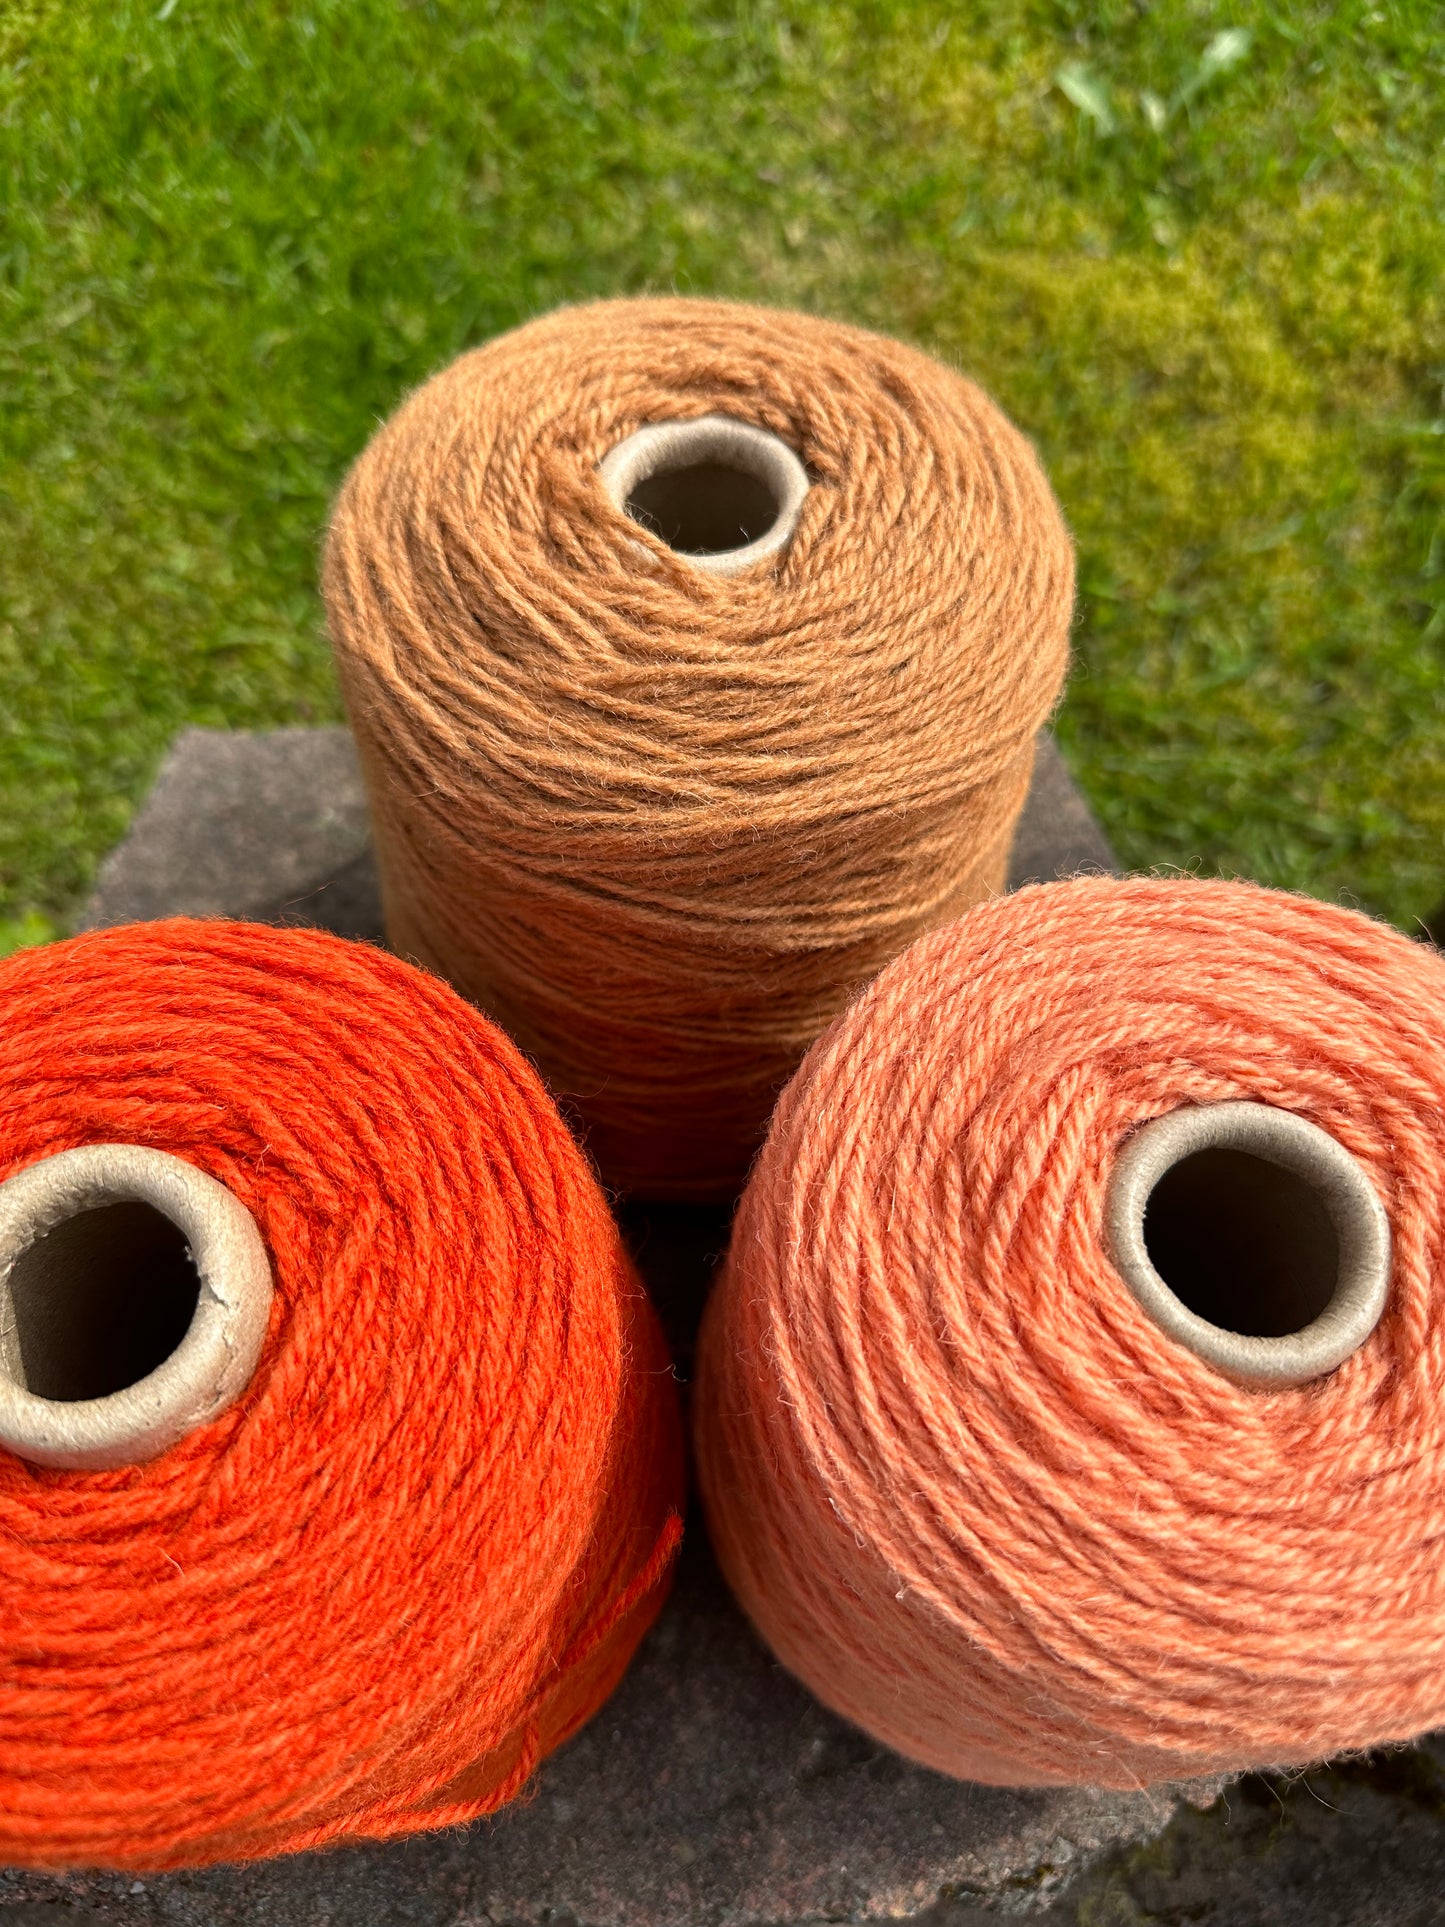 Mid orange brown 100% rug wool on cone for tufting